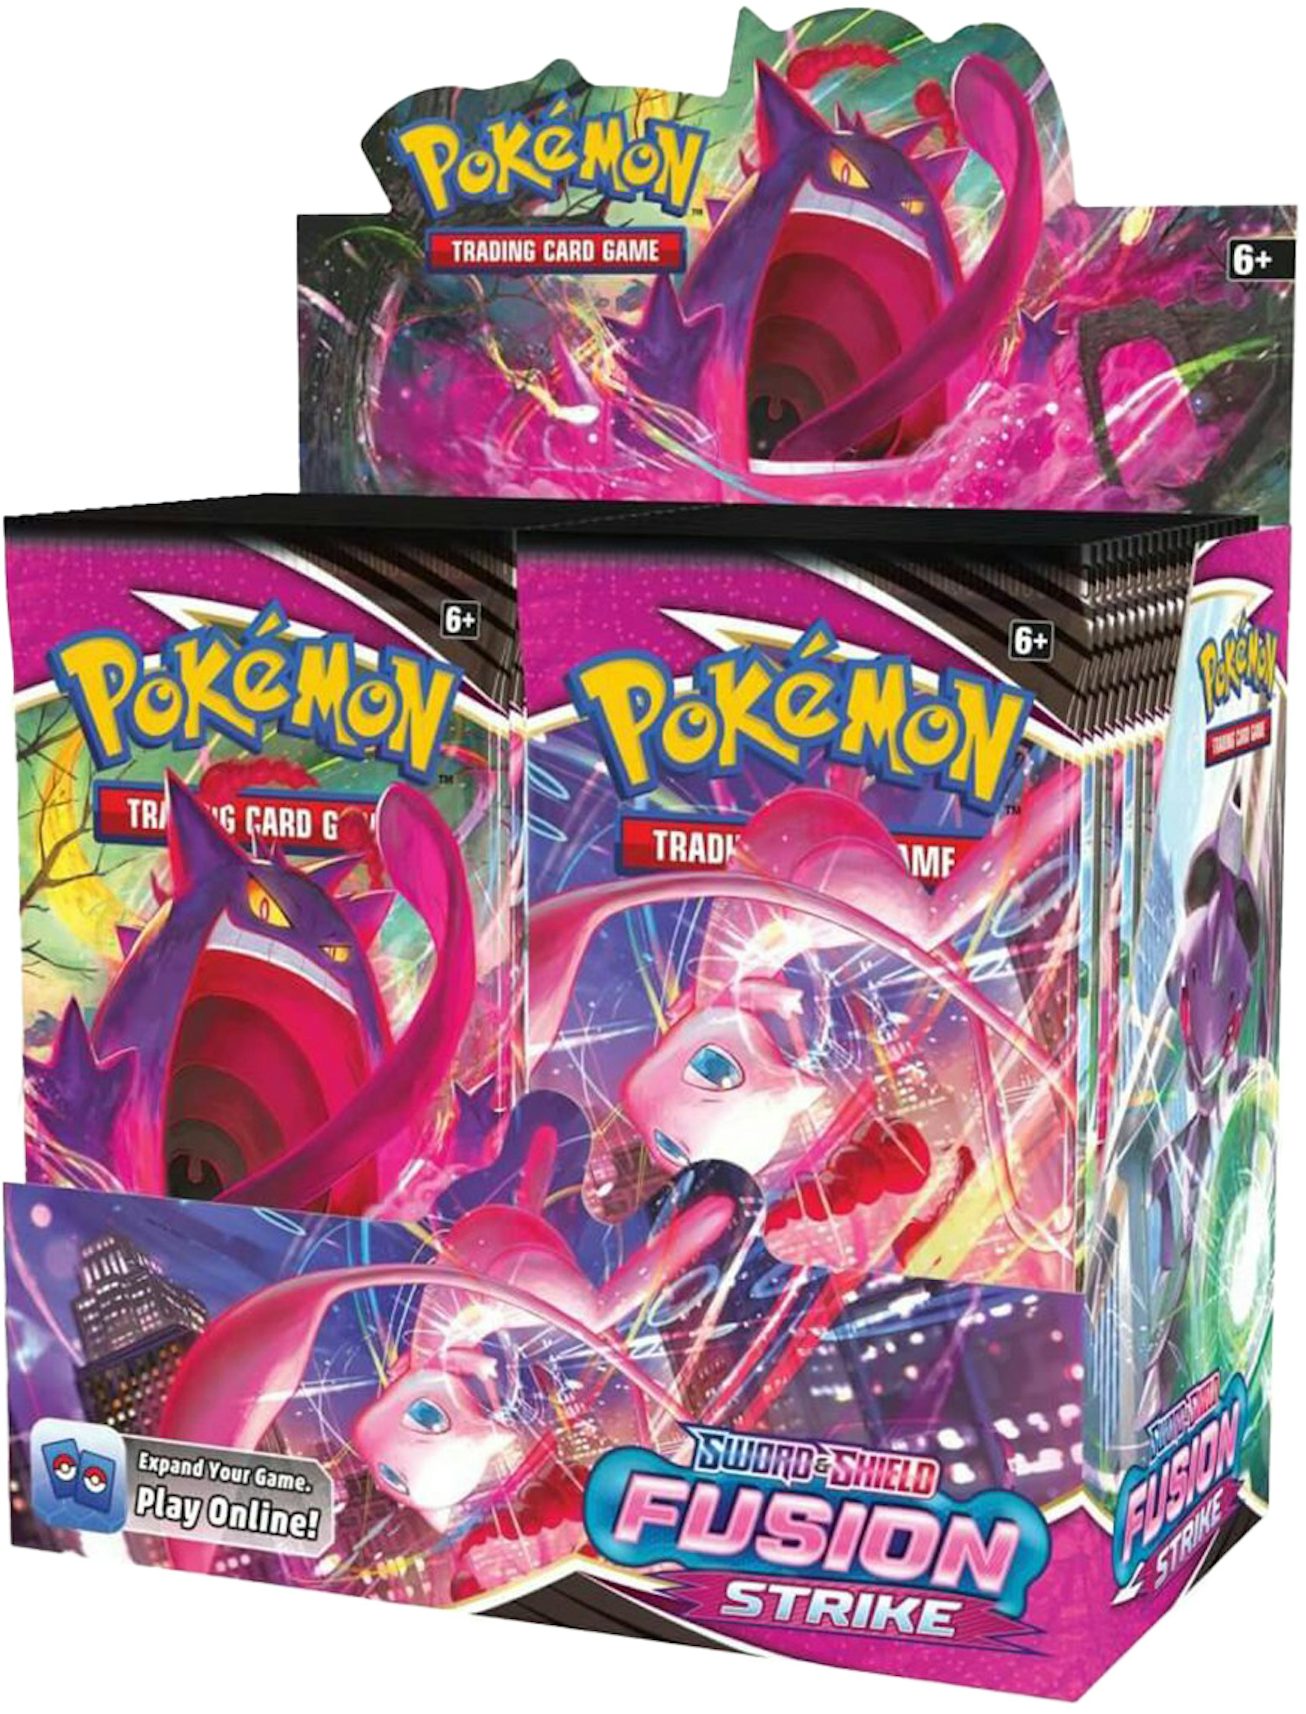 Evolving Skies Booster Box In Stock Availability and Price Tracking